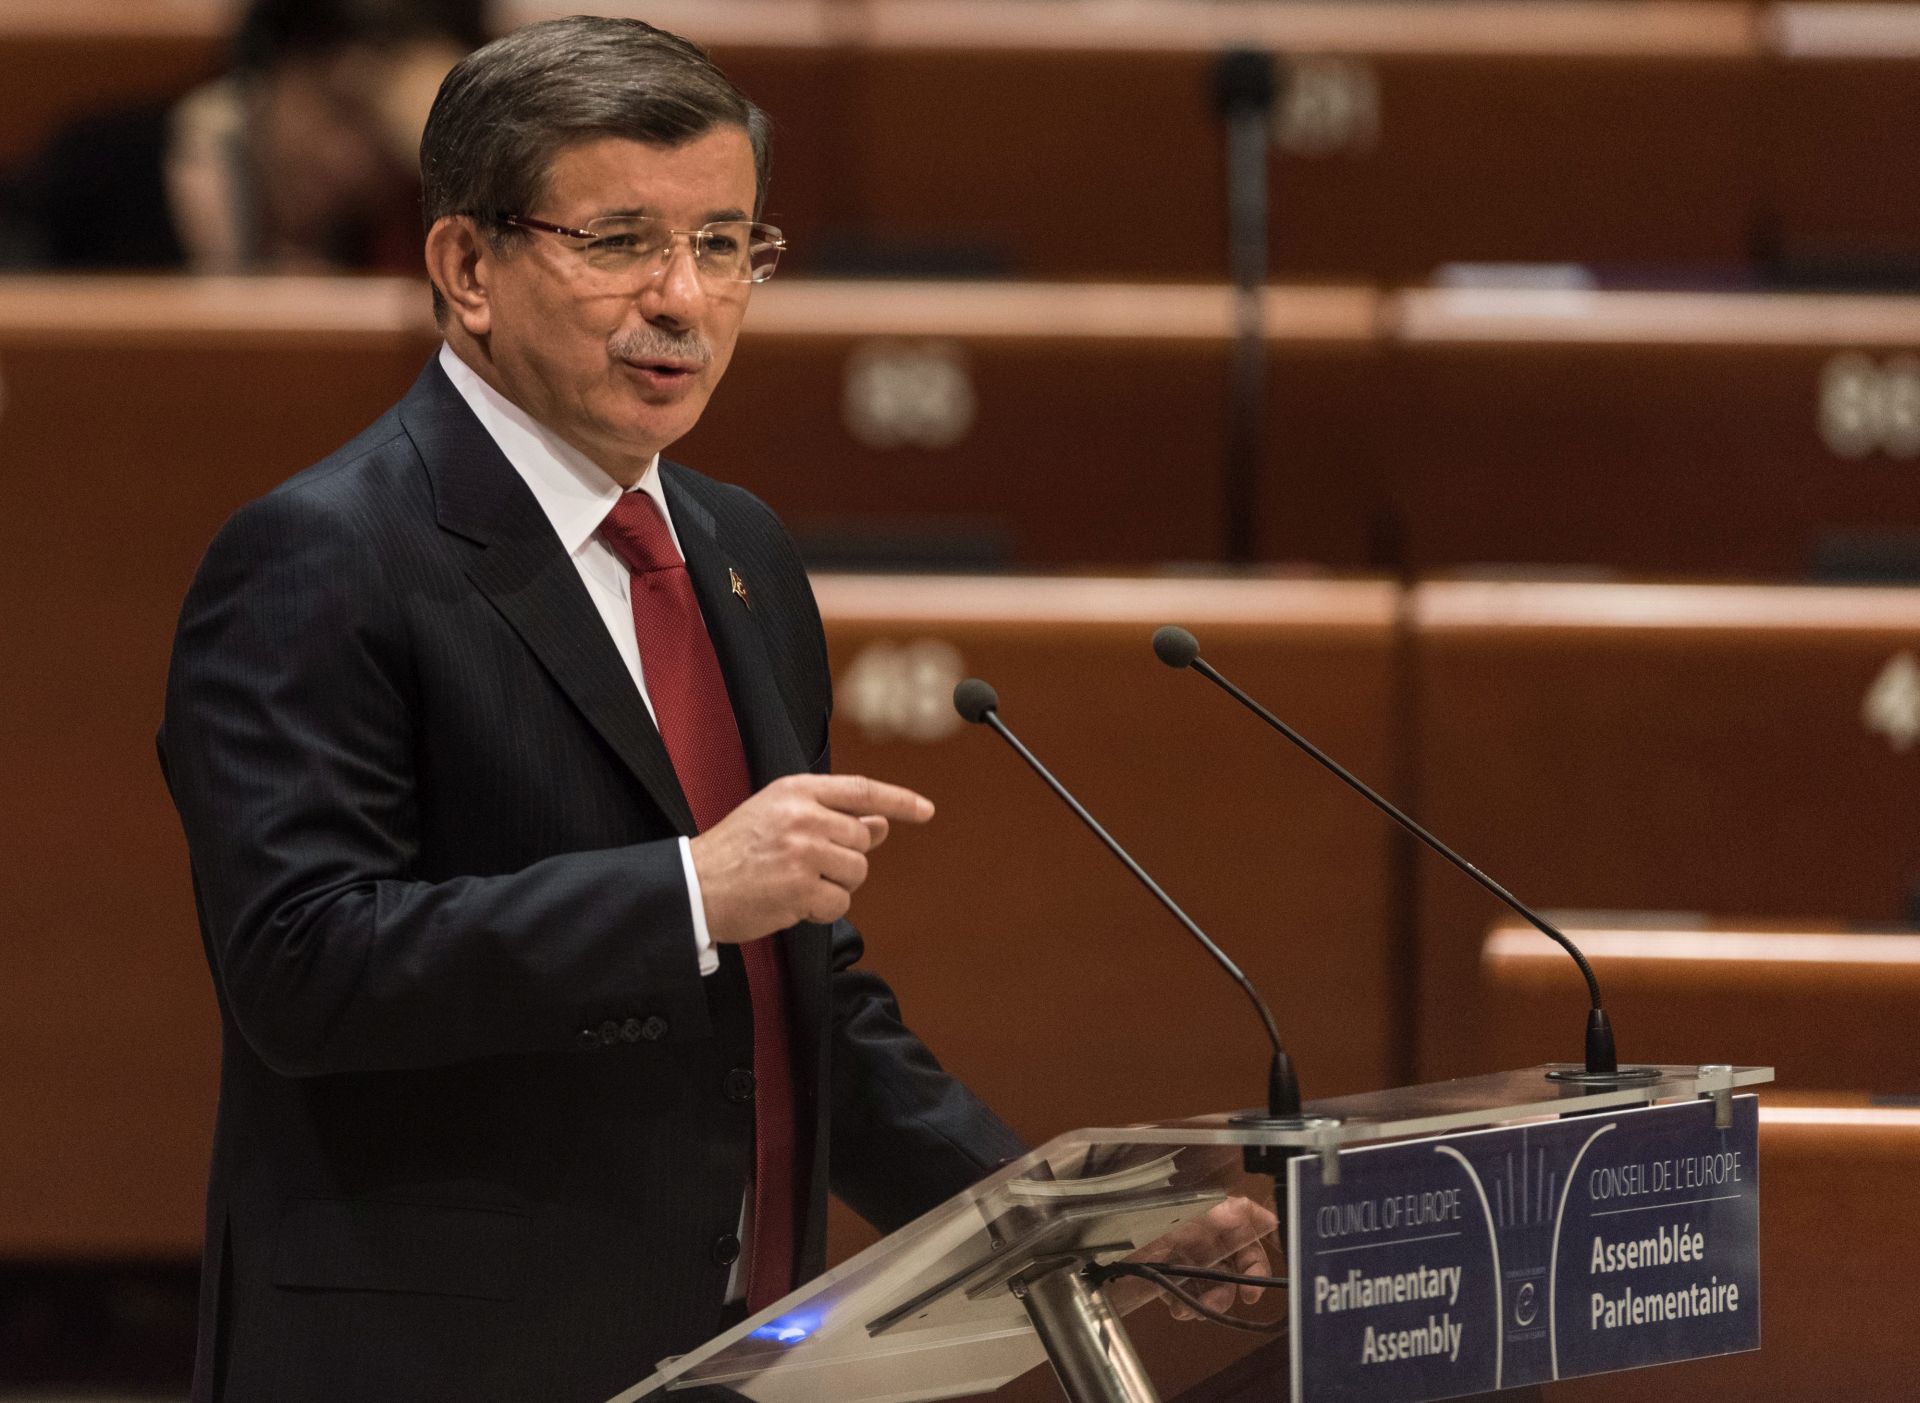 epa05266746 Ahmet Davutoglu, Prime Minister of Turkey delivers his speech to the Council of Europe in Strasbourg, France, 19 April 2016.  EPA/PATRICK SEEGER